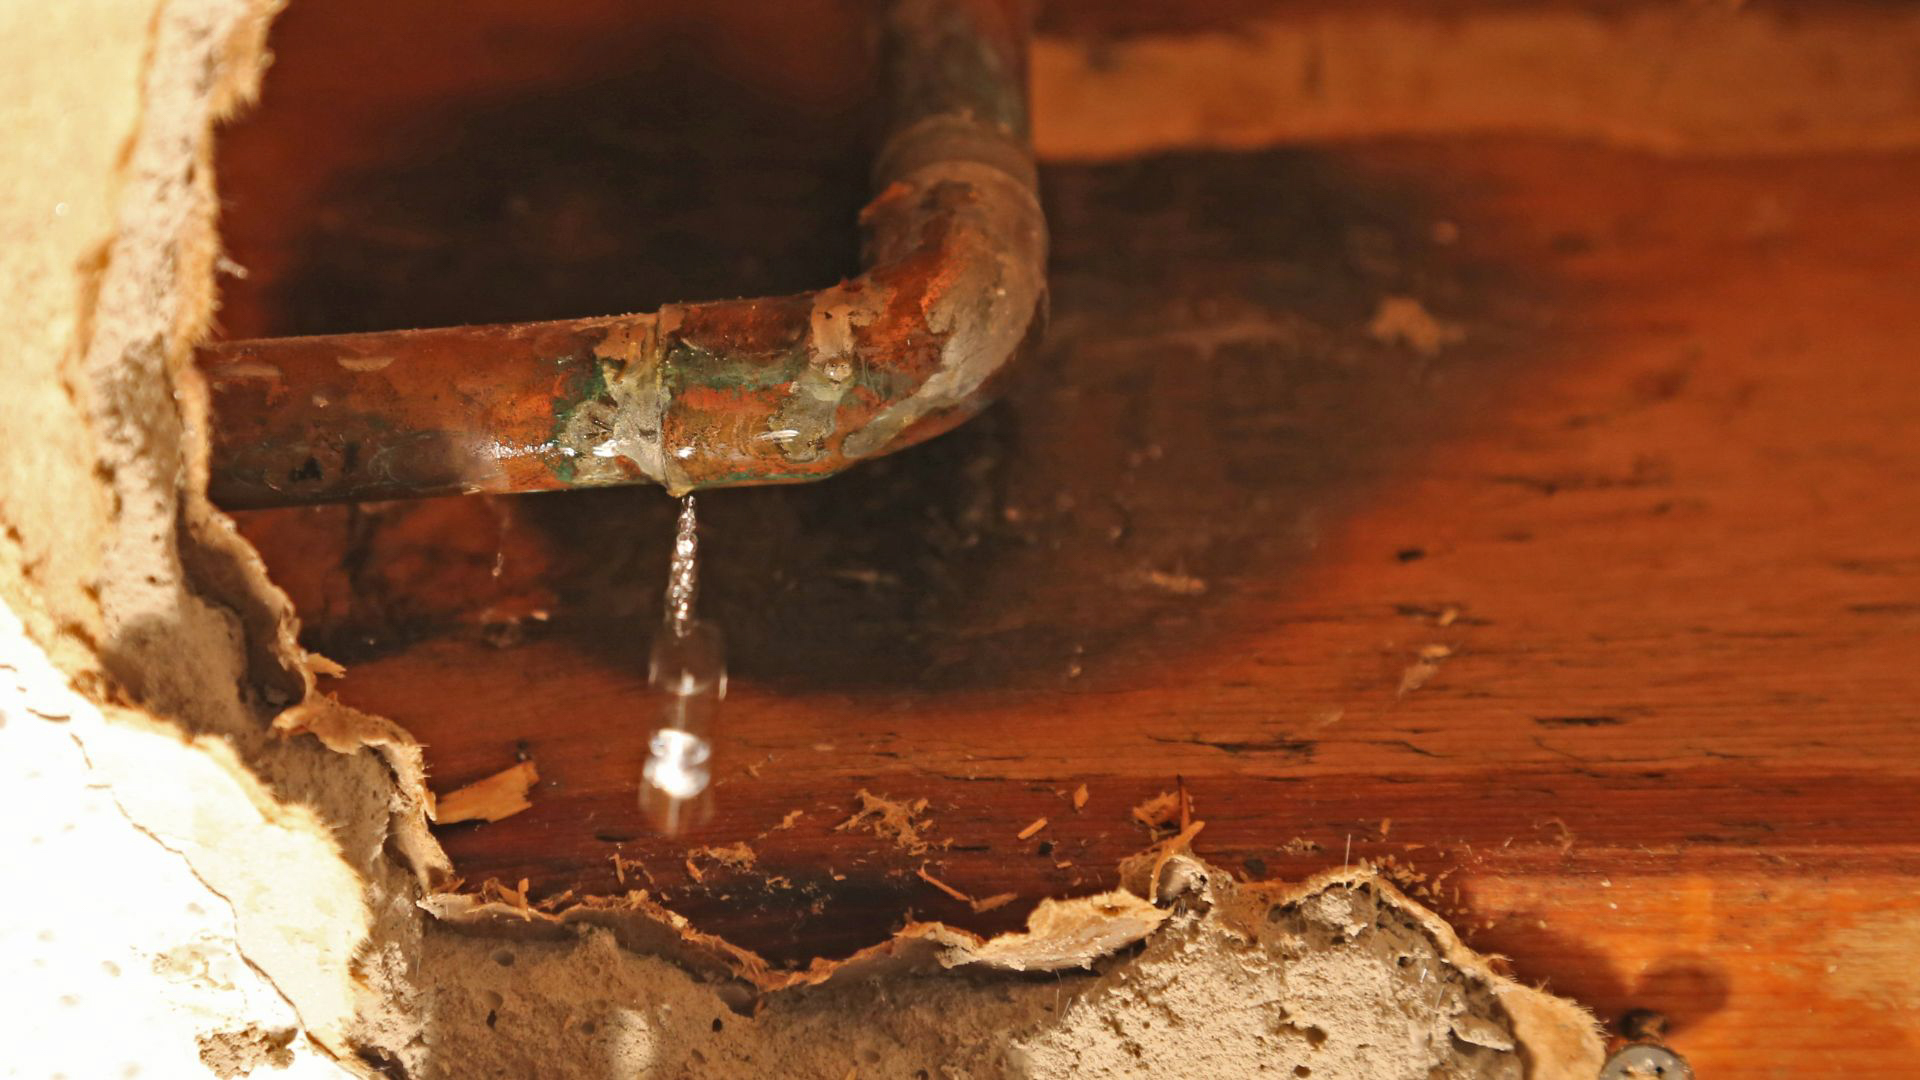 Water Leak Detection & Repair in Golden, CO from Fix-it 24/7 Plumbing, Heating, Air & Electric